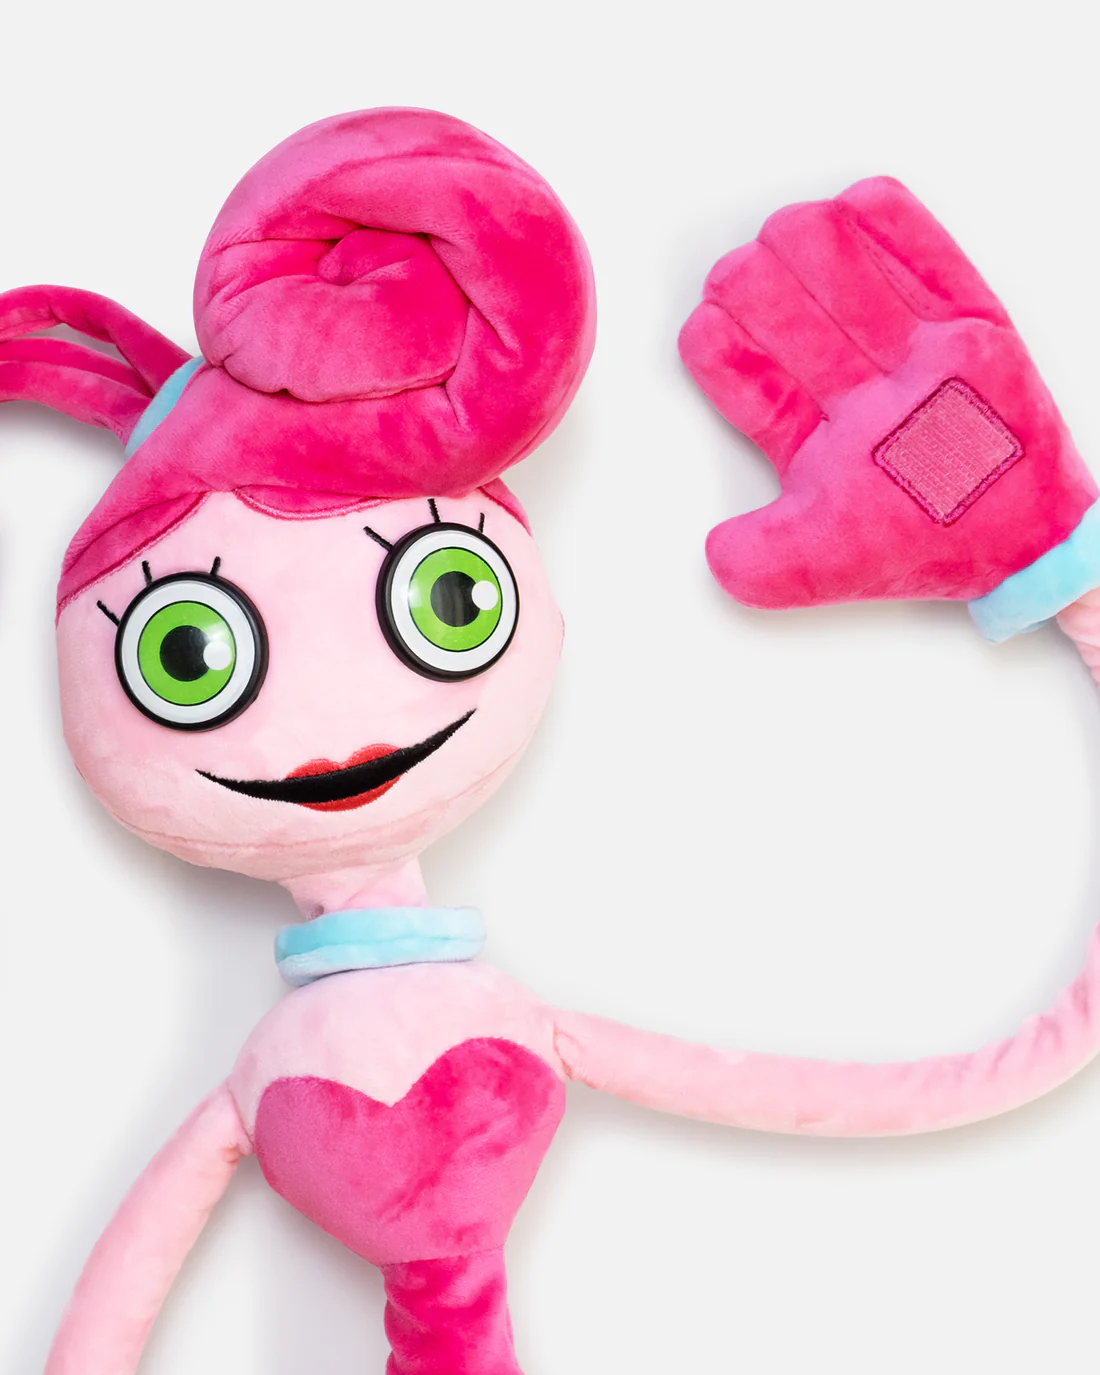 Mommy Long Legs Costume - Huggy Wuggy Plush